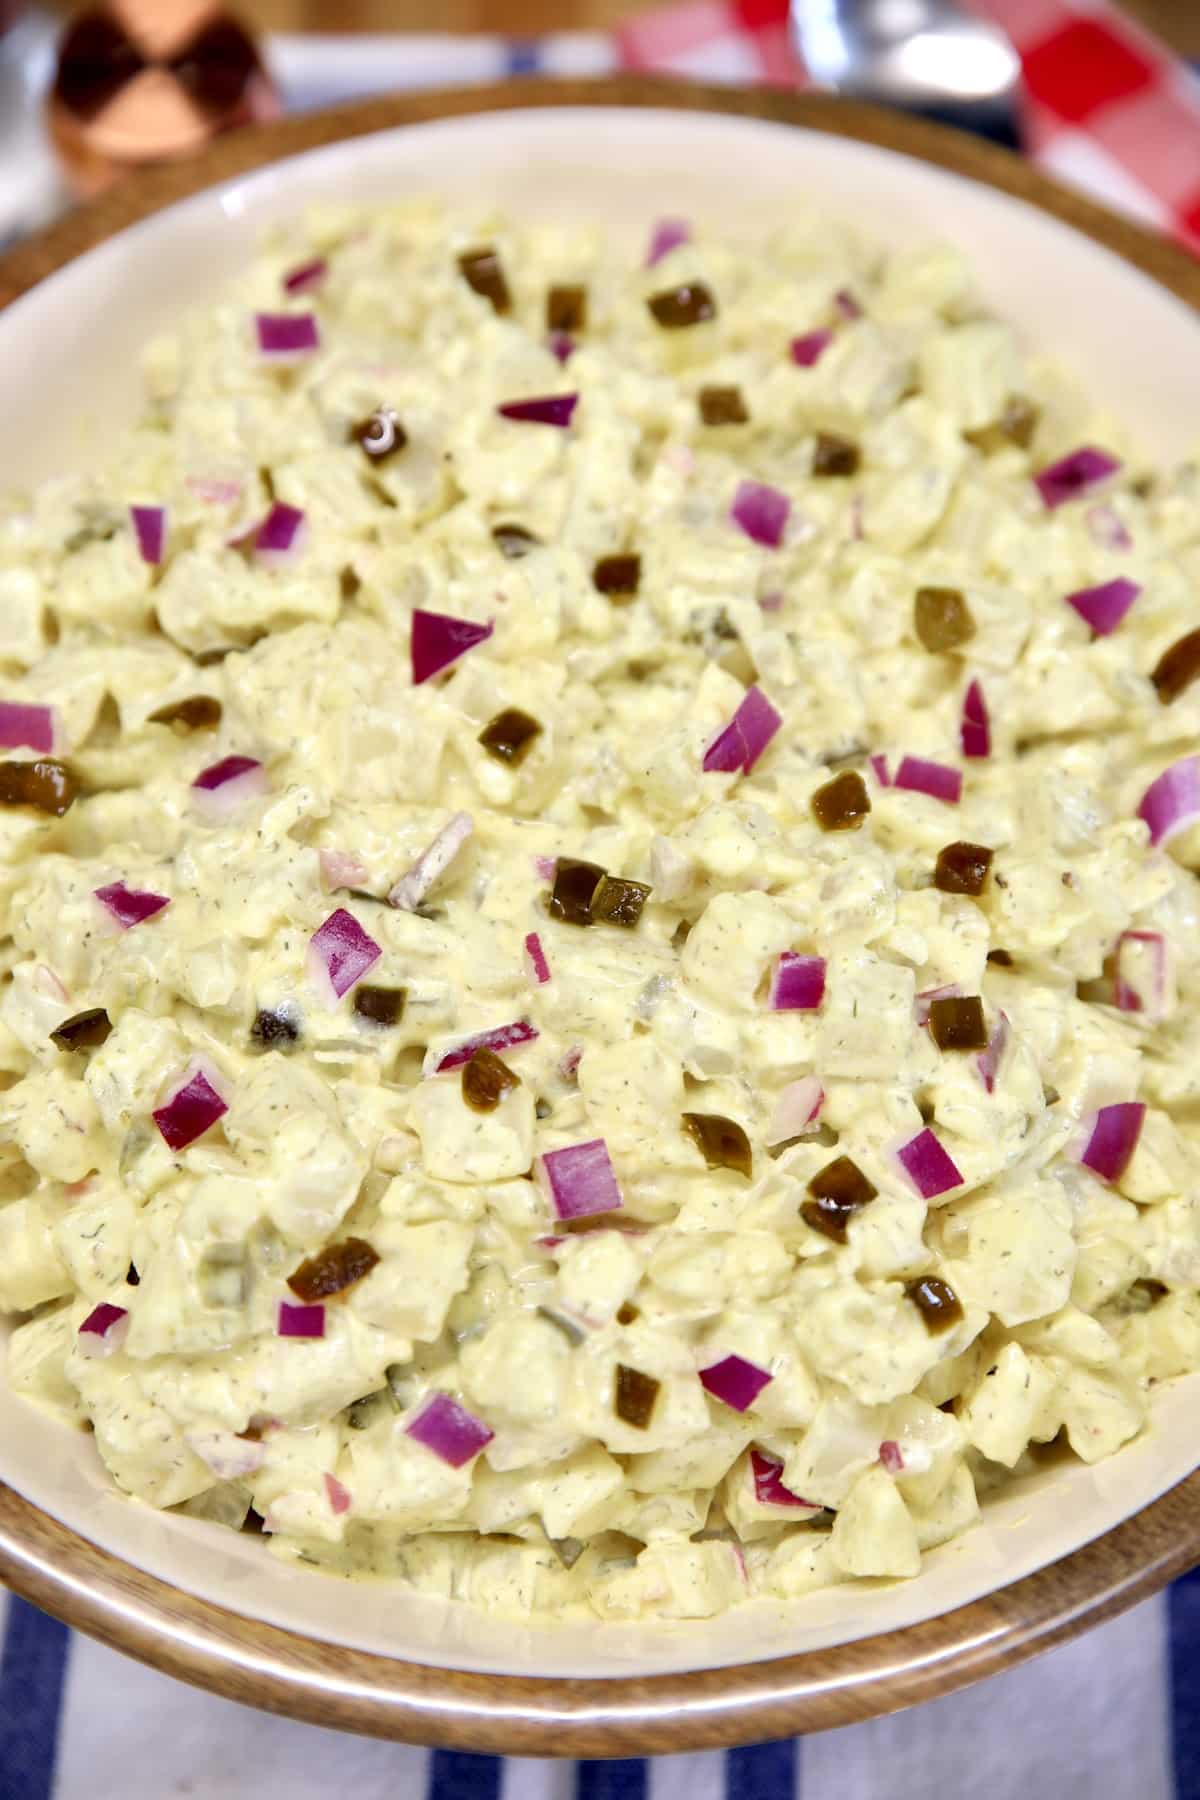 Jalapeno and red onion potato salad in a abowl.